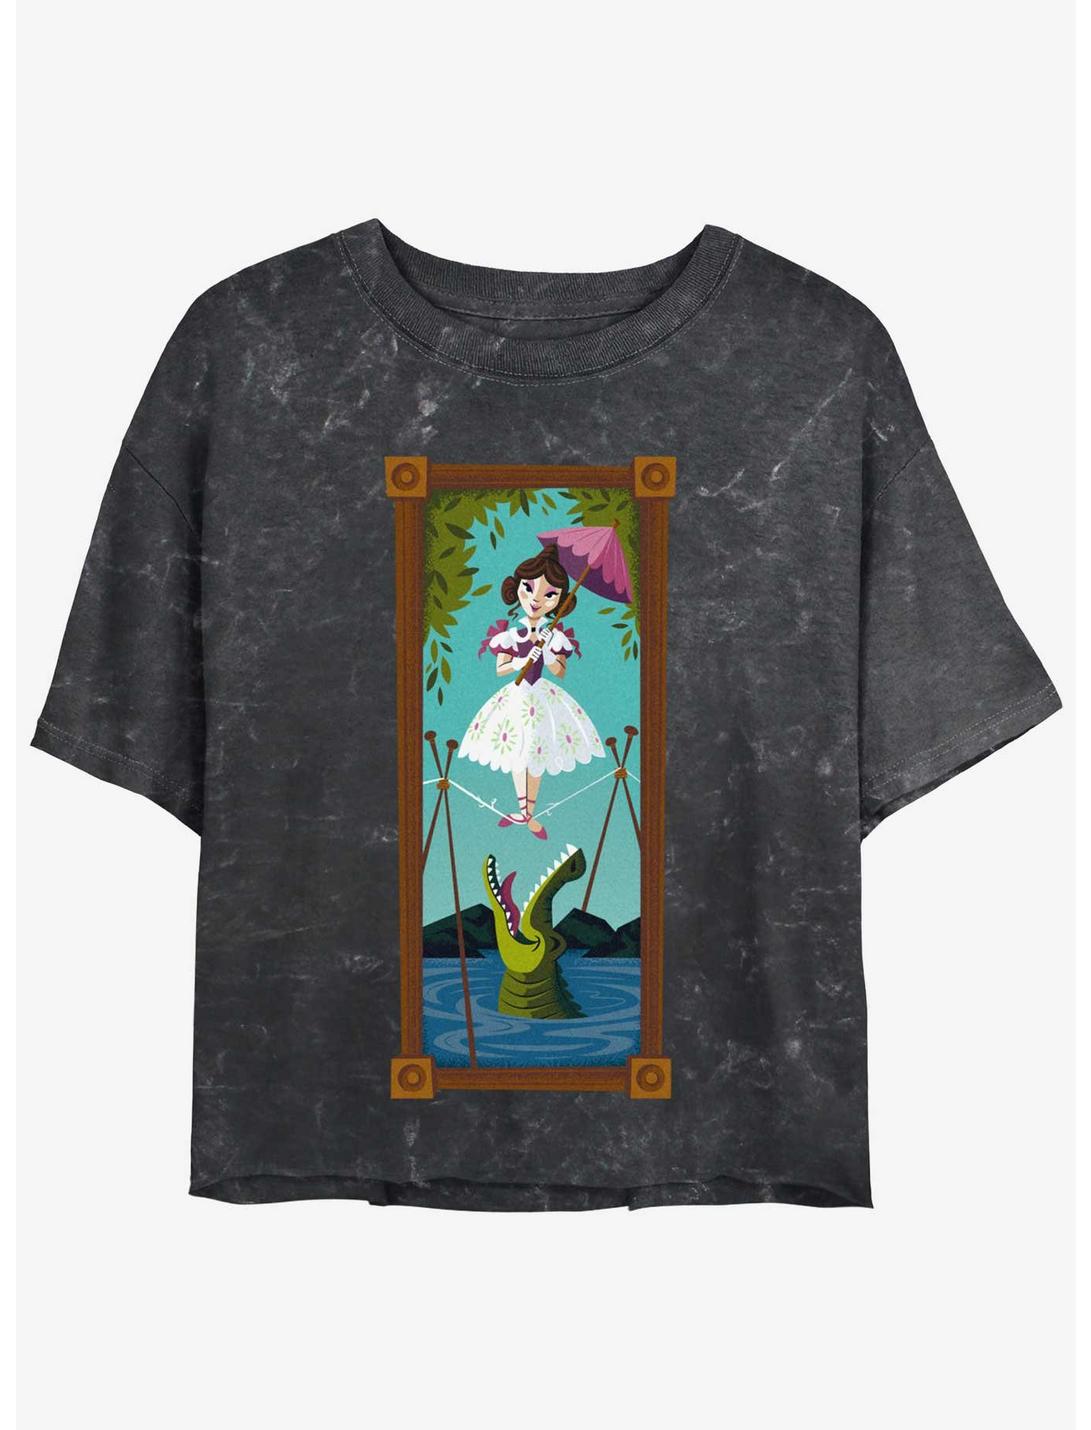 Disney The Haunted Mansion The Tightrope Walker Portrait Womens Mineral Wash Crop T-Shirt Her Universe Web Exclusive, BLACK, hi-res